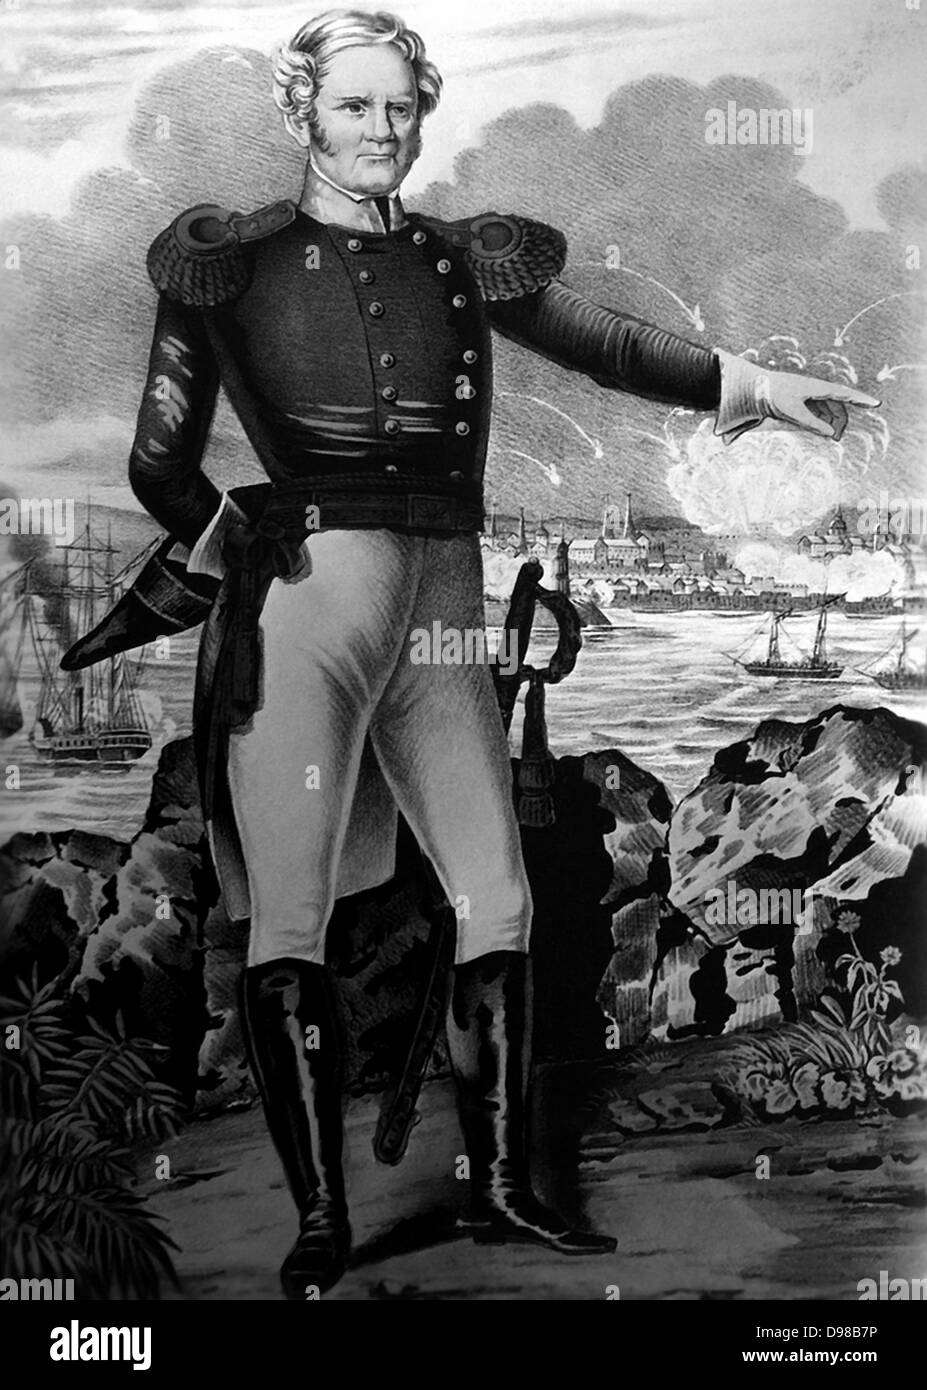 Major-General Winfield Scott (1786-1866) American soldier. During the Mexican-American War 1846-1848 Scott commanded the southern of America's two armies. Scott pictured at the Battle of Veracruz, 20 day siege of the city 9-29 March 1847, pointing to the warships in the harbour. American forces took the city and marched on to Mexico City. Thius was the first large-scale amphibious assault by the nited States forces. Lithograph. Stock Photo